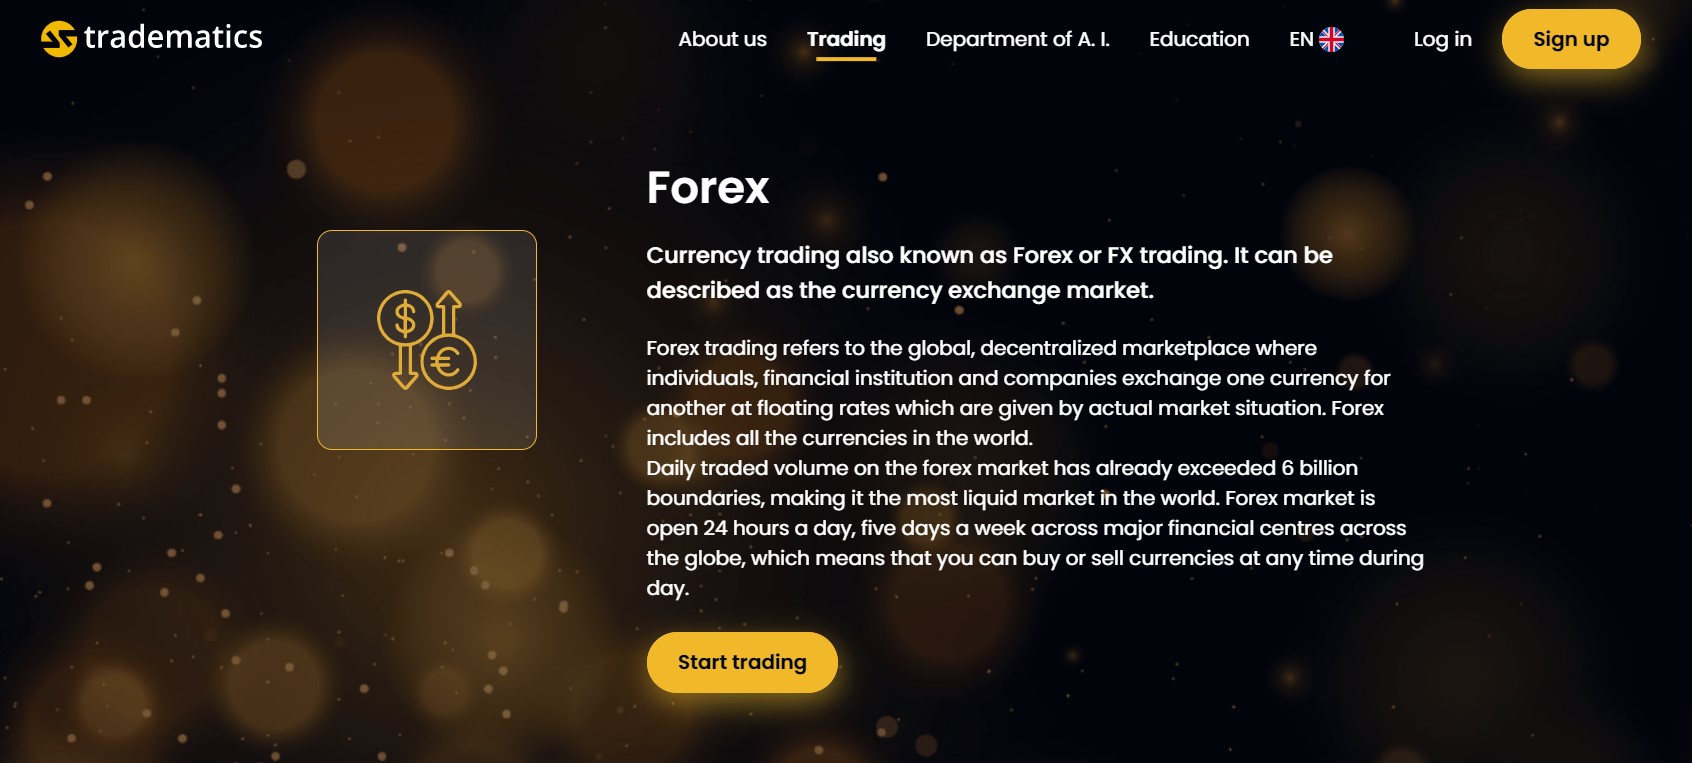 Currency trading also known as Forex or FX trading. It can be described as the currency exchange market.